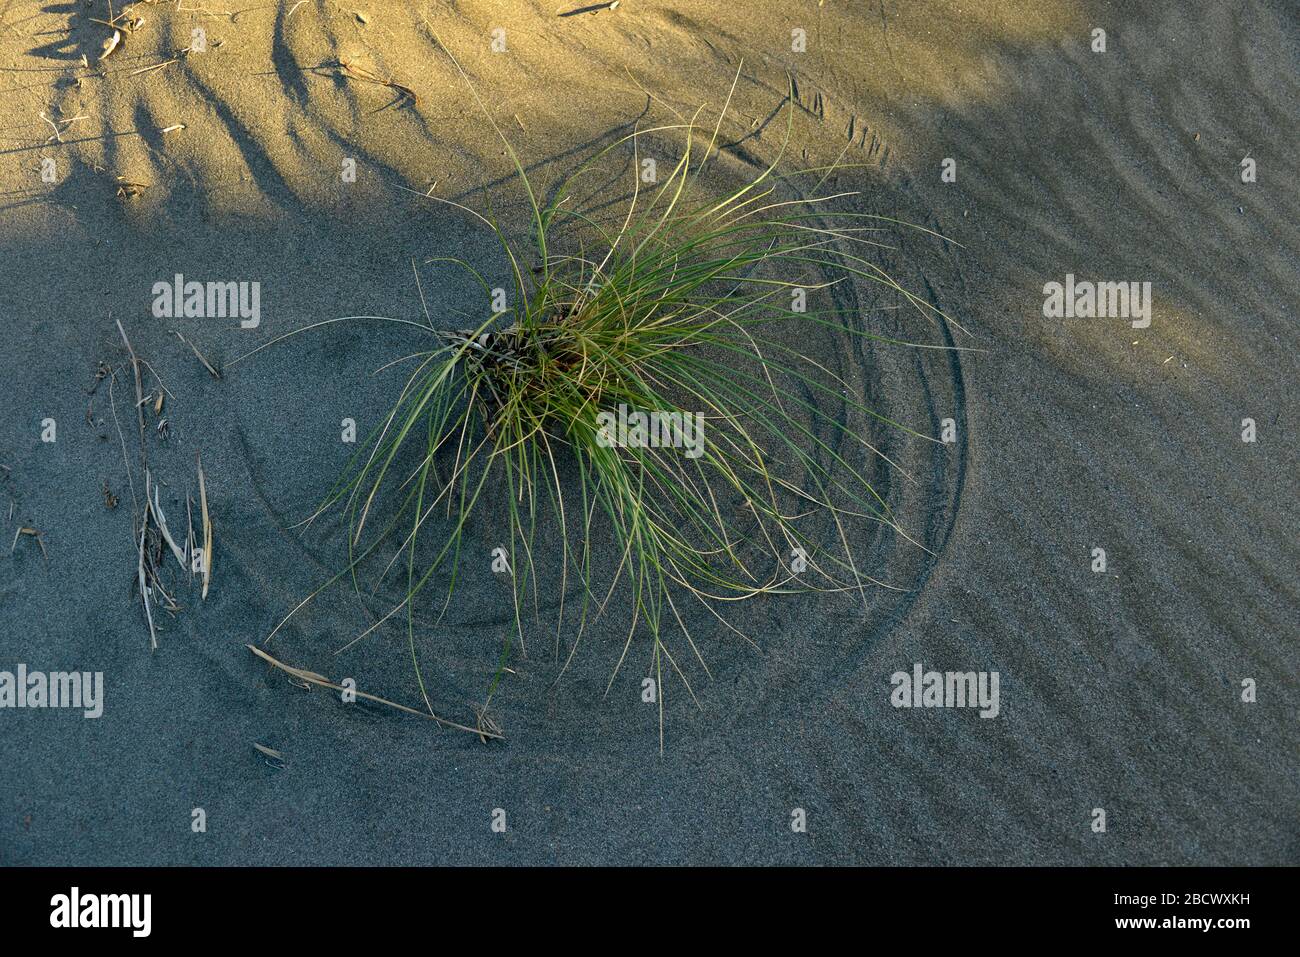 Circles made in the sand by the spines of a wind blown Spinifex plant (Spinifex sericeus). Stock Photo